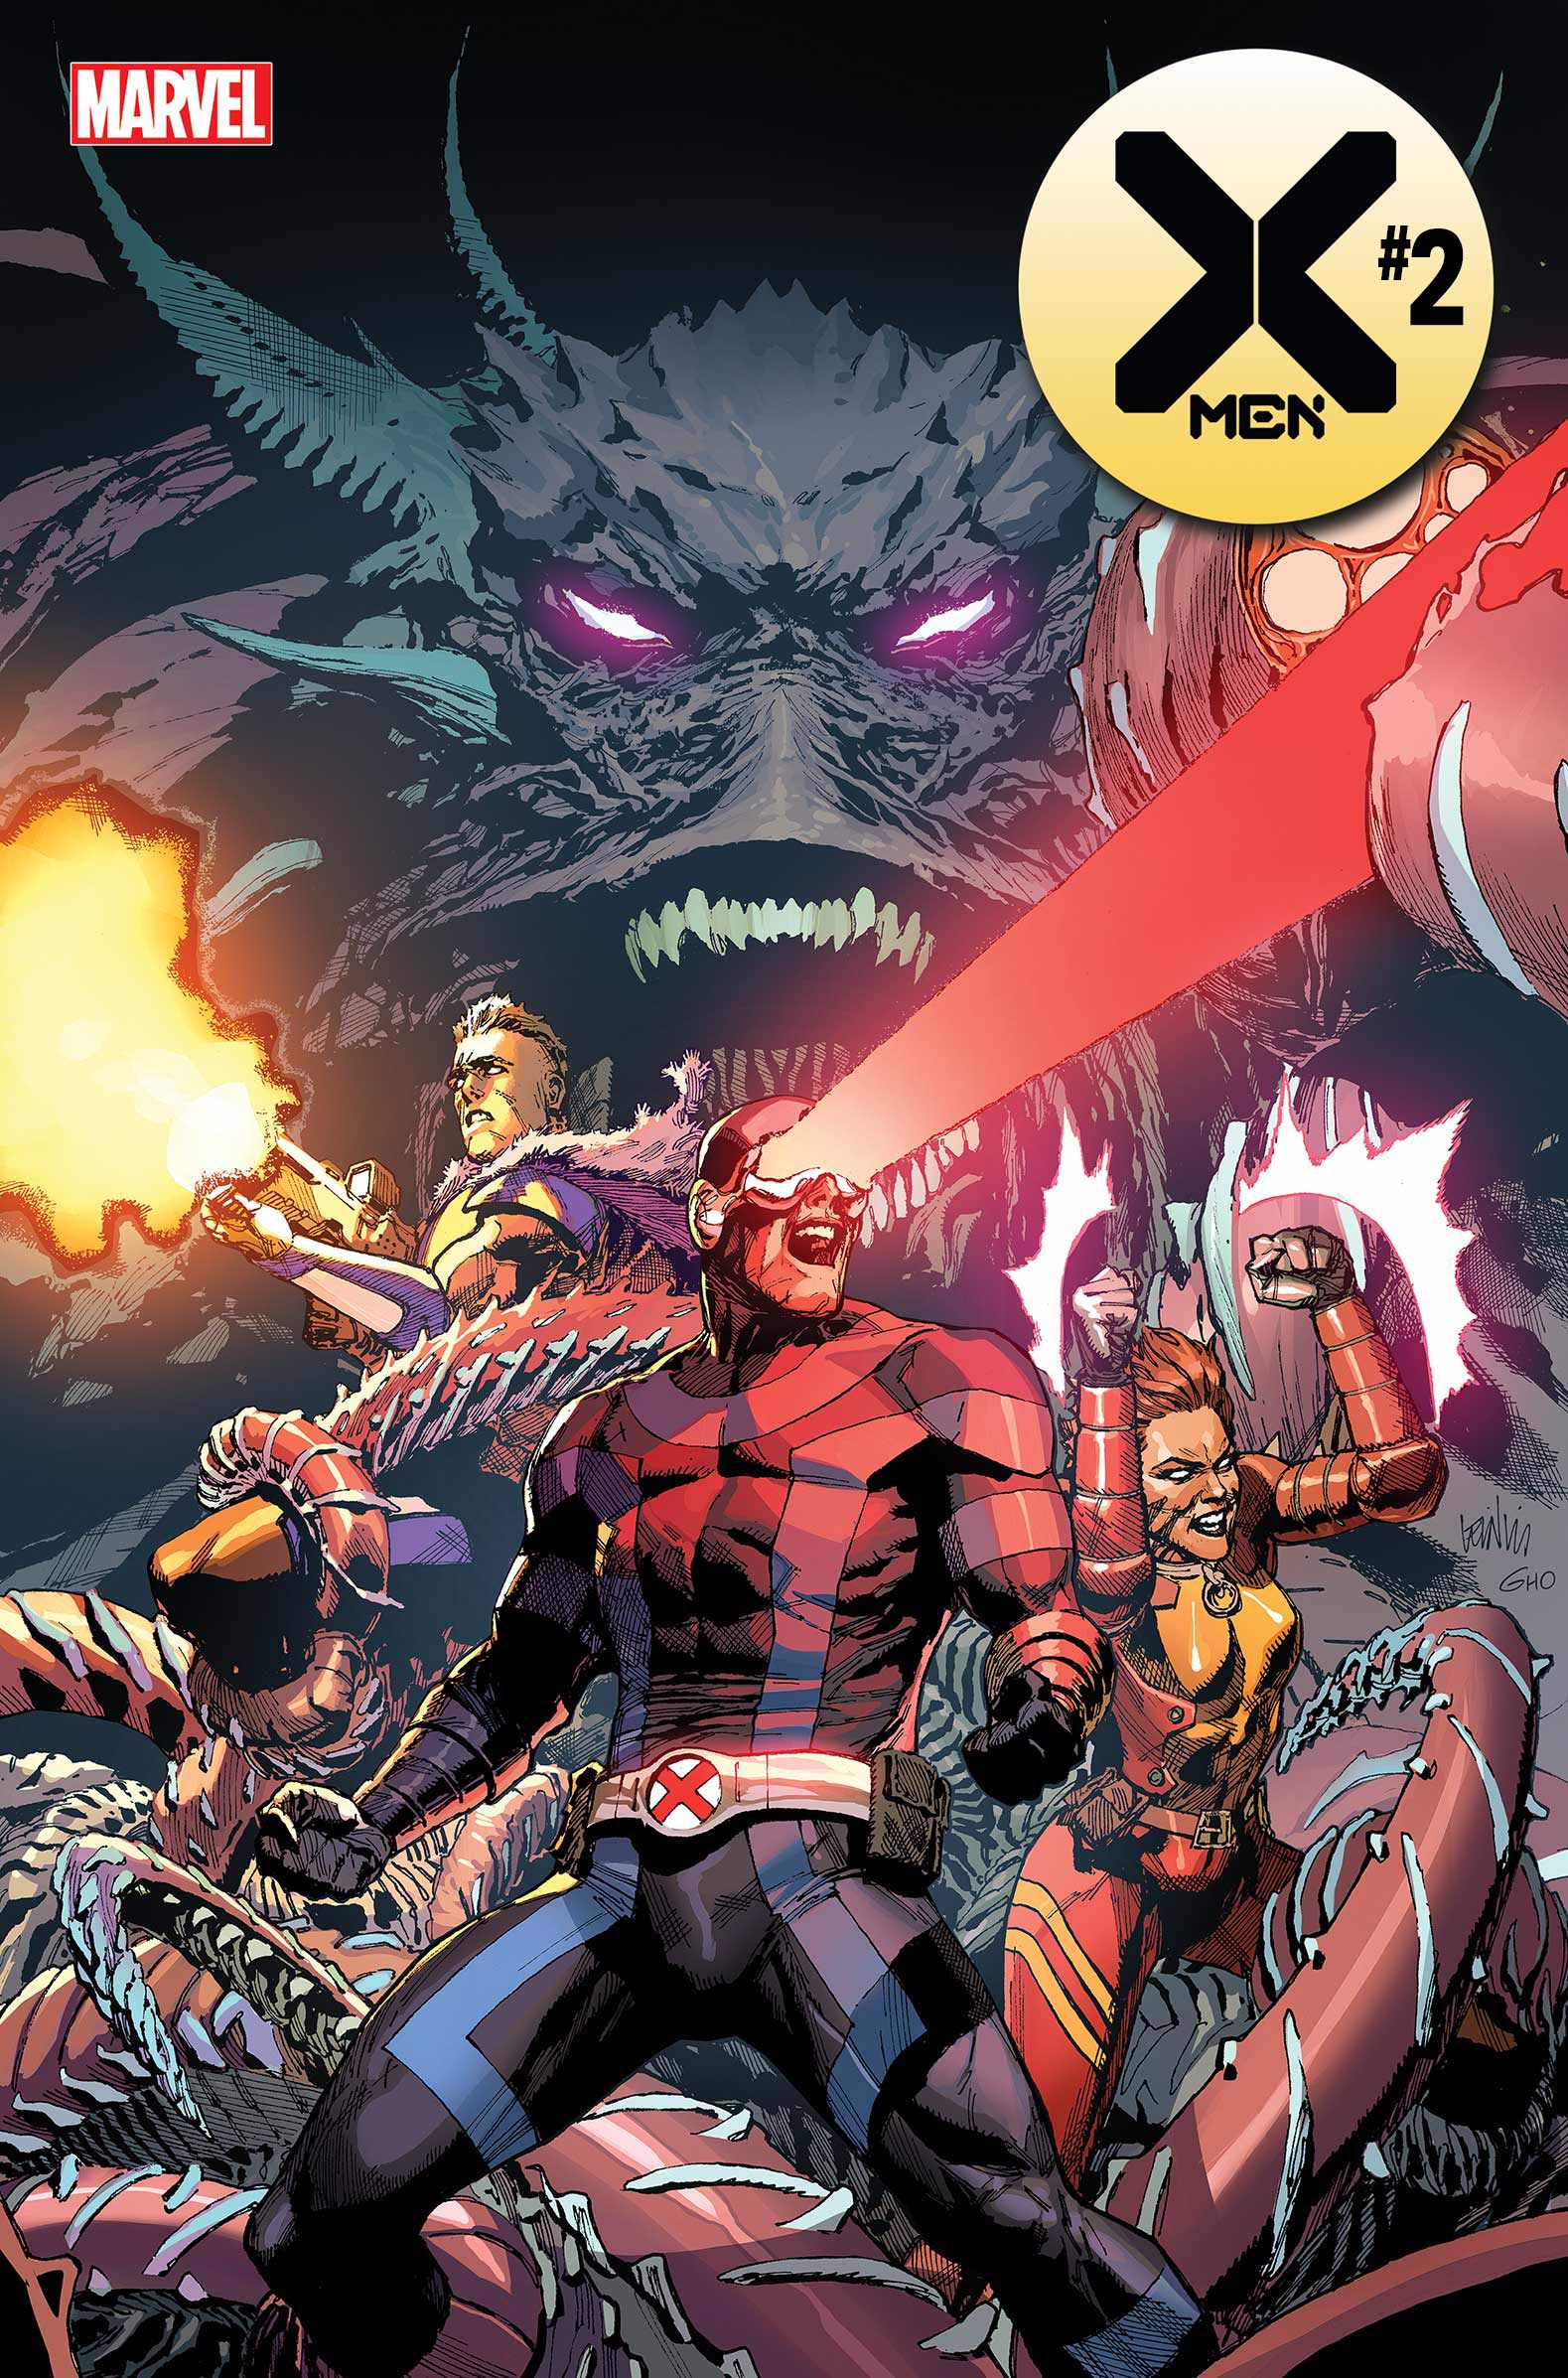 Marvel Comics reveals new covers and info for Absolute Carnage, Dawn of X, X-Men, and more